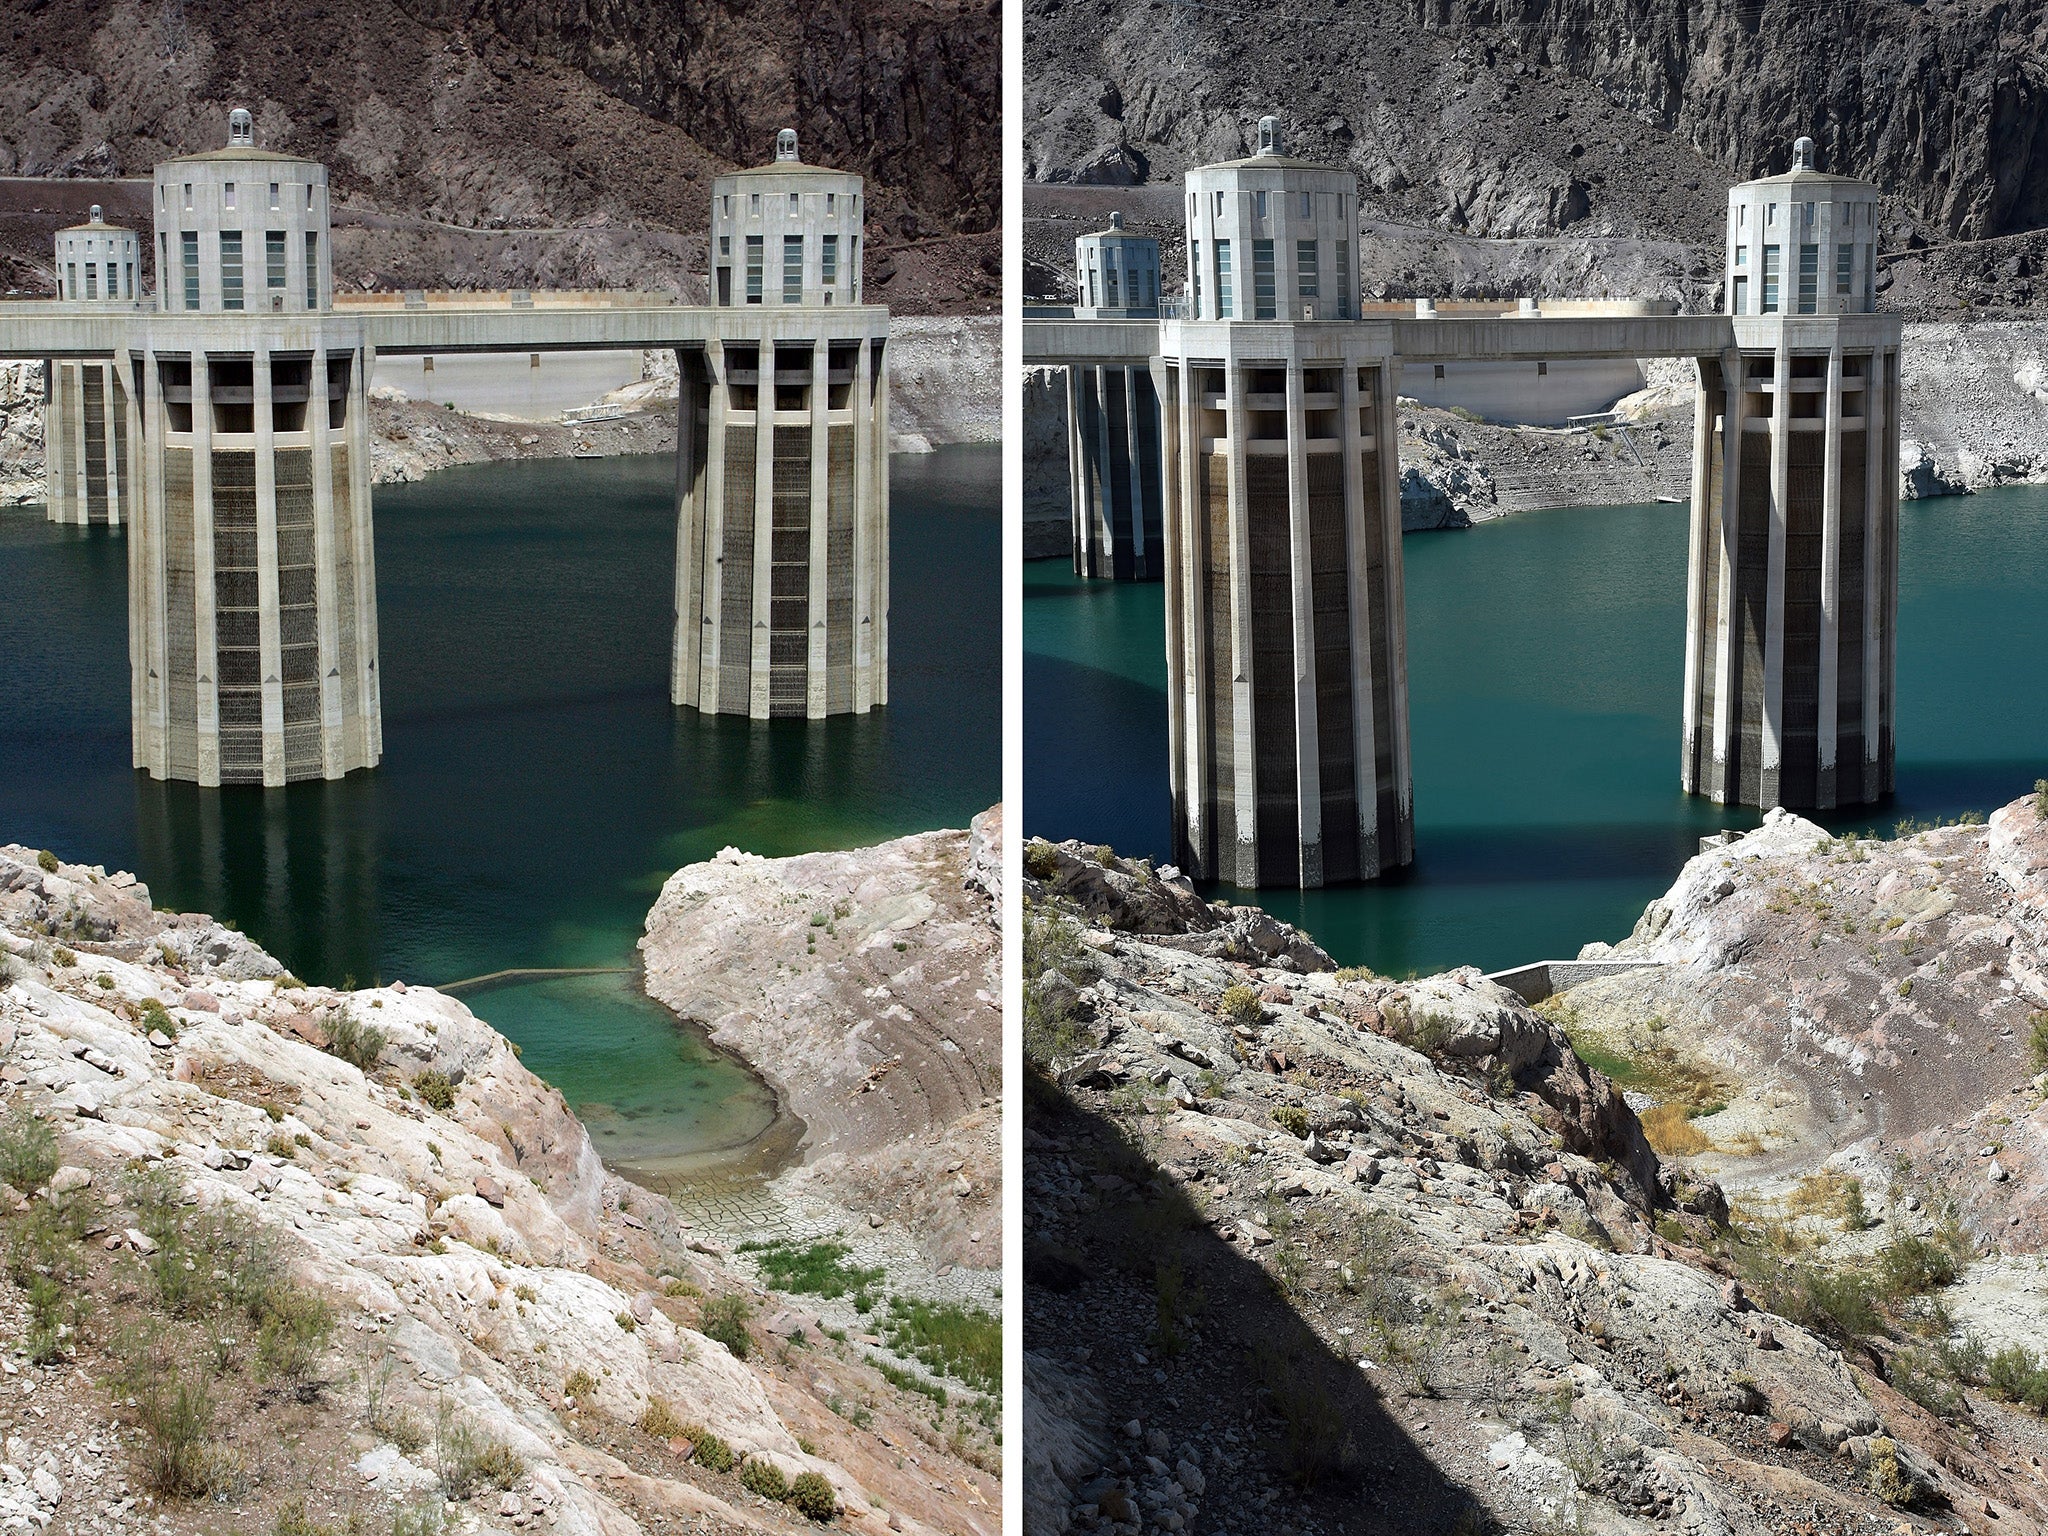 Images show Lake Mead in 2007 and again in 2015.